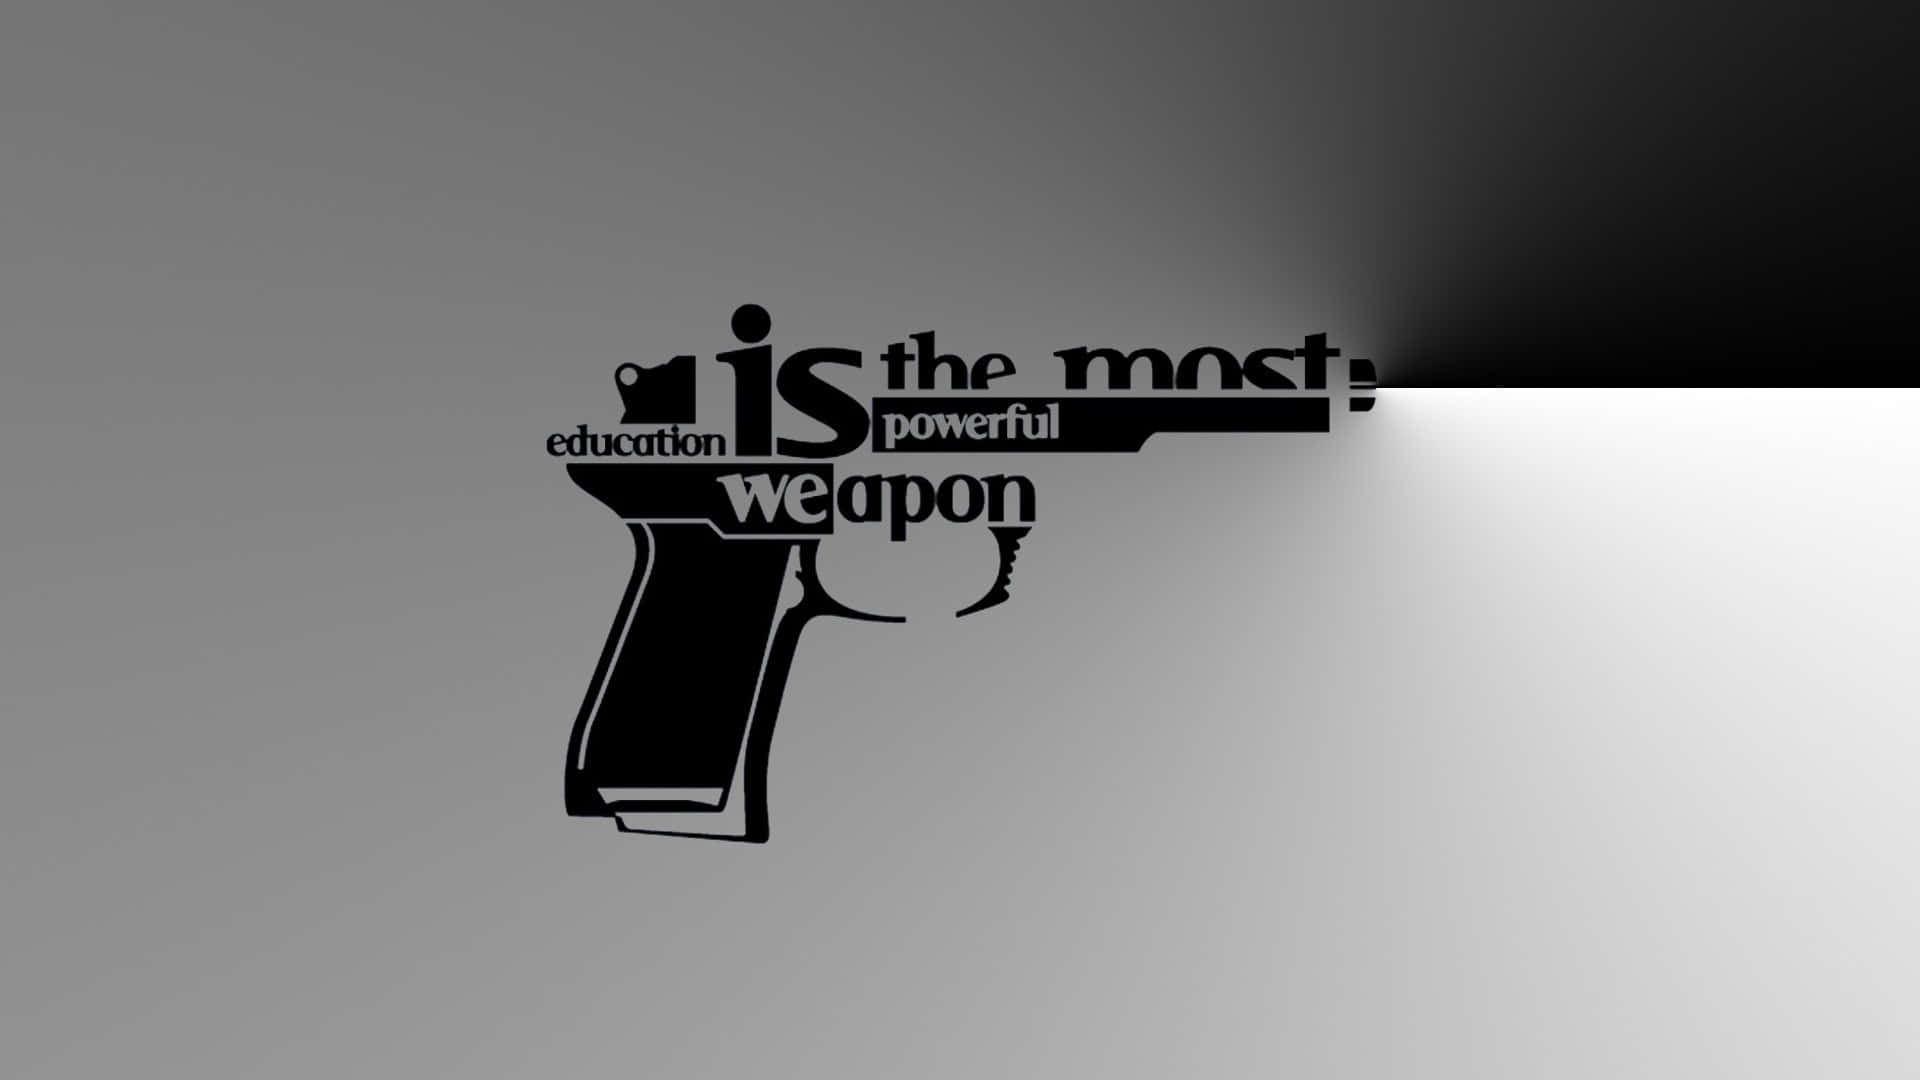 Greatest Weapon Of An Educated Person Wallpaper